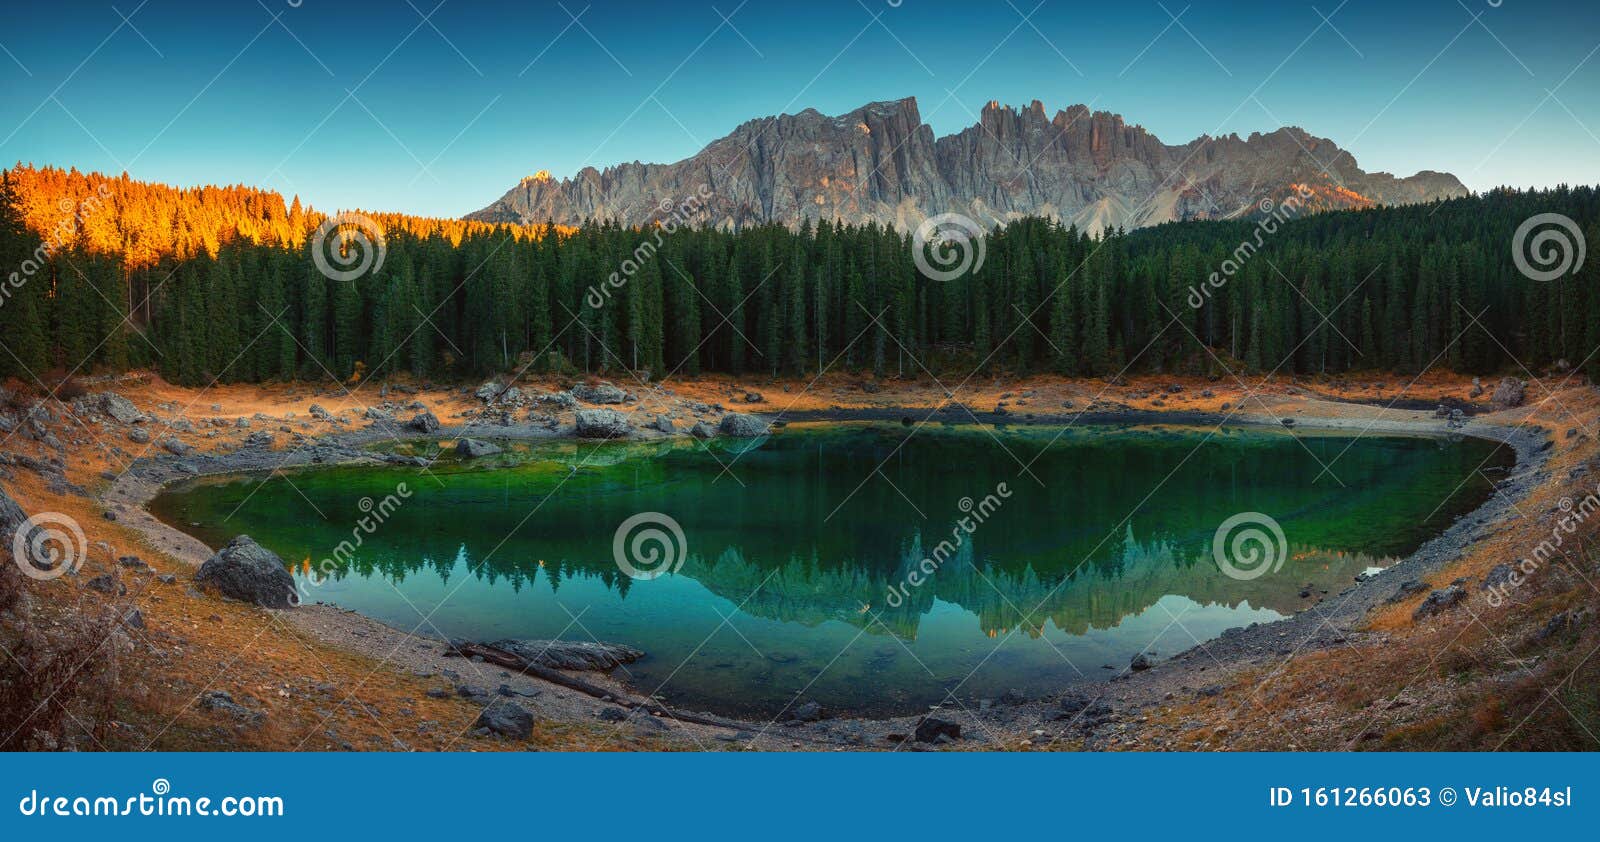 carezza lake in dolomitesn  or lago di carezza with reflection of mountains at sunset in the dolomites, south tyrol, italy